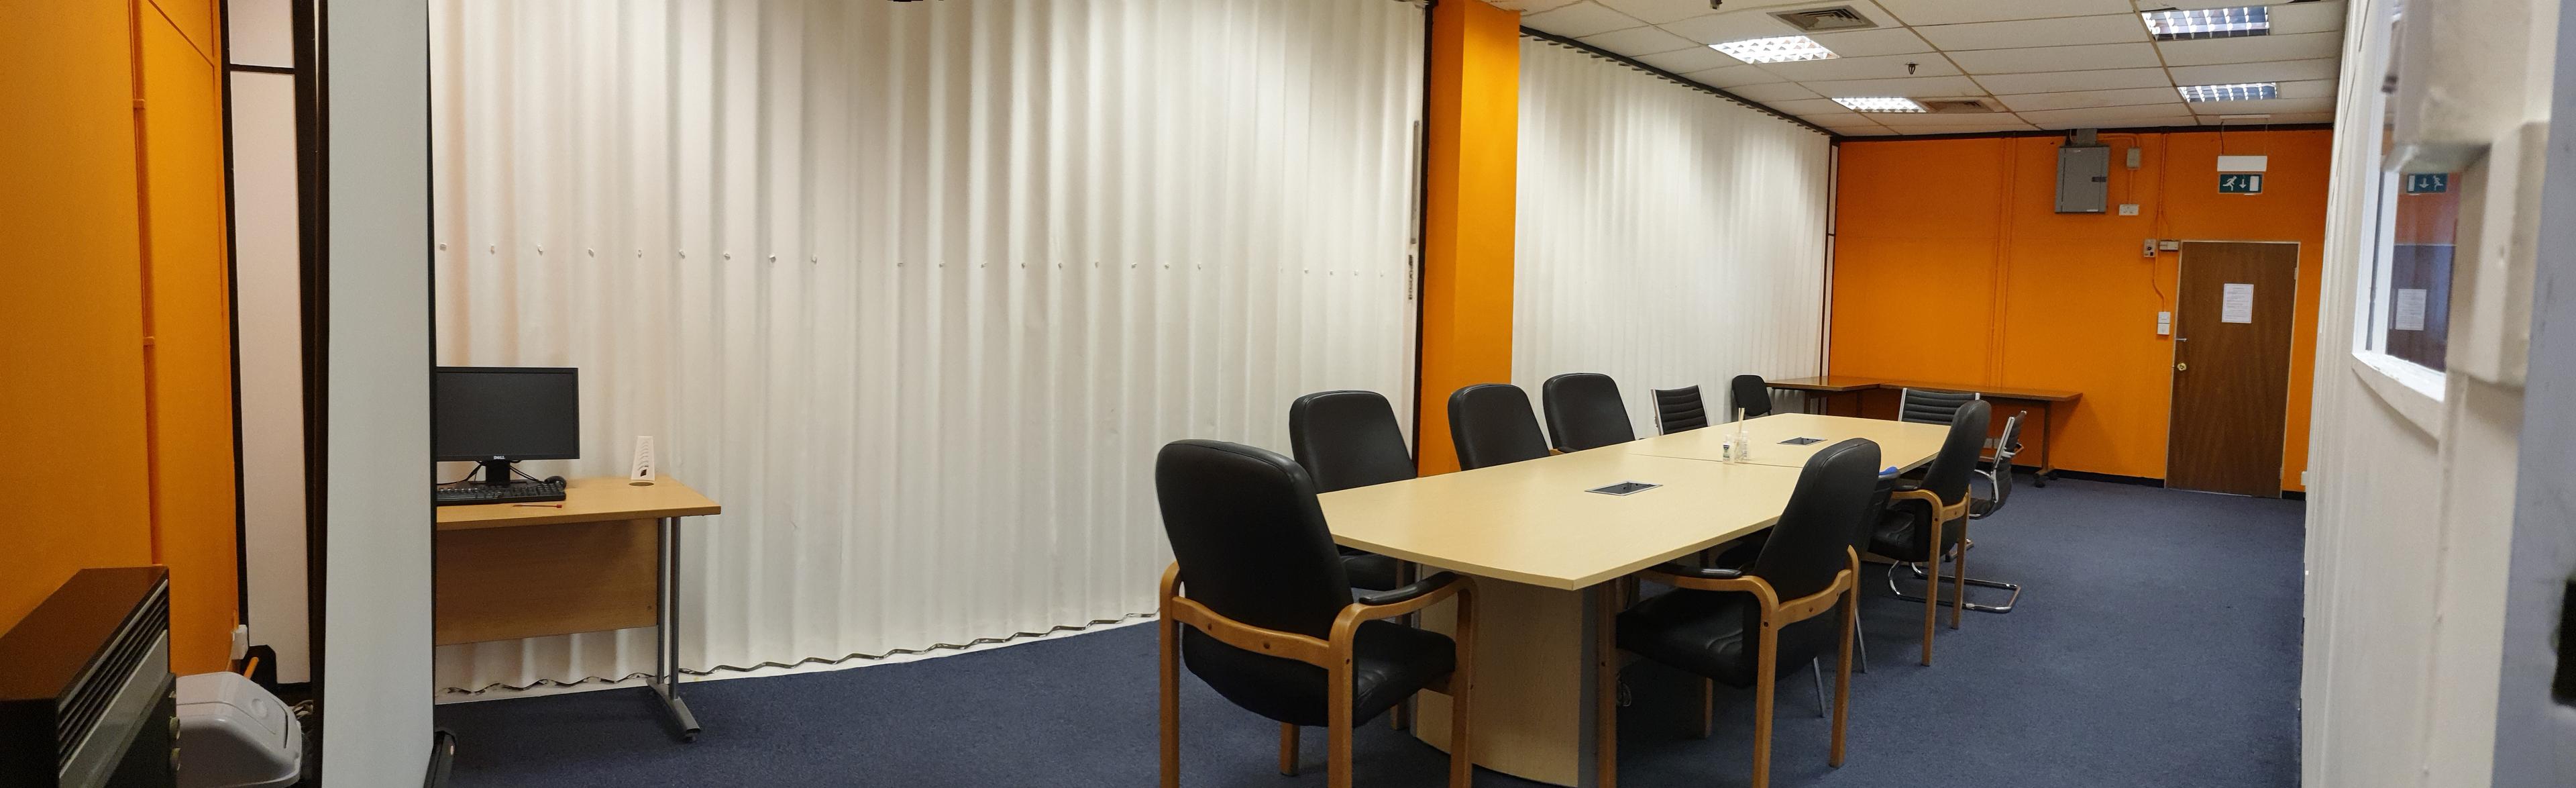 Boardroom, The Woolwich College photo #2